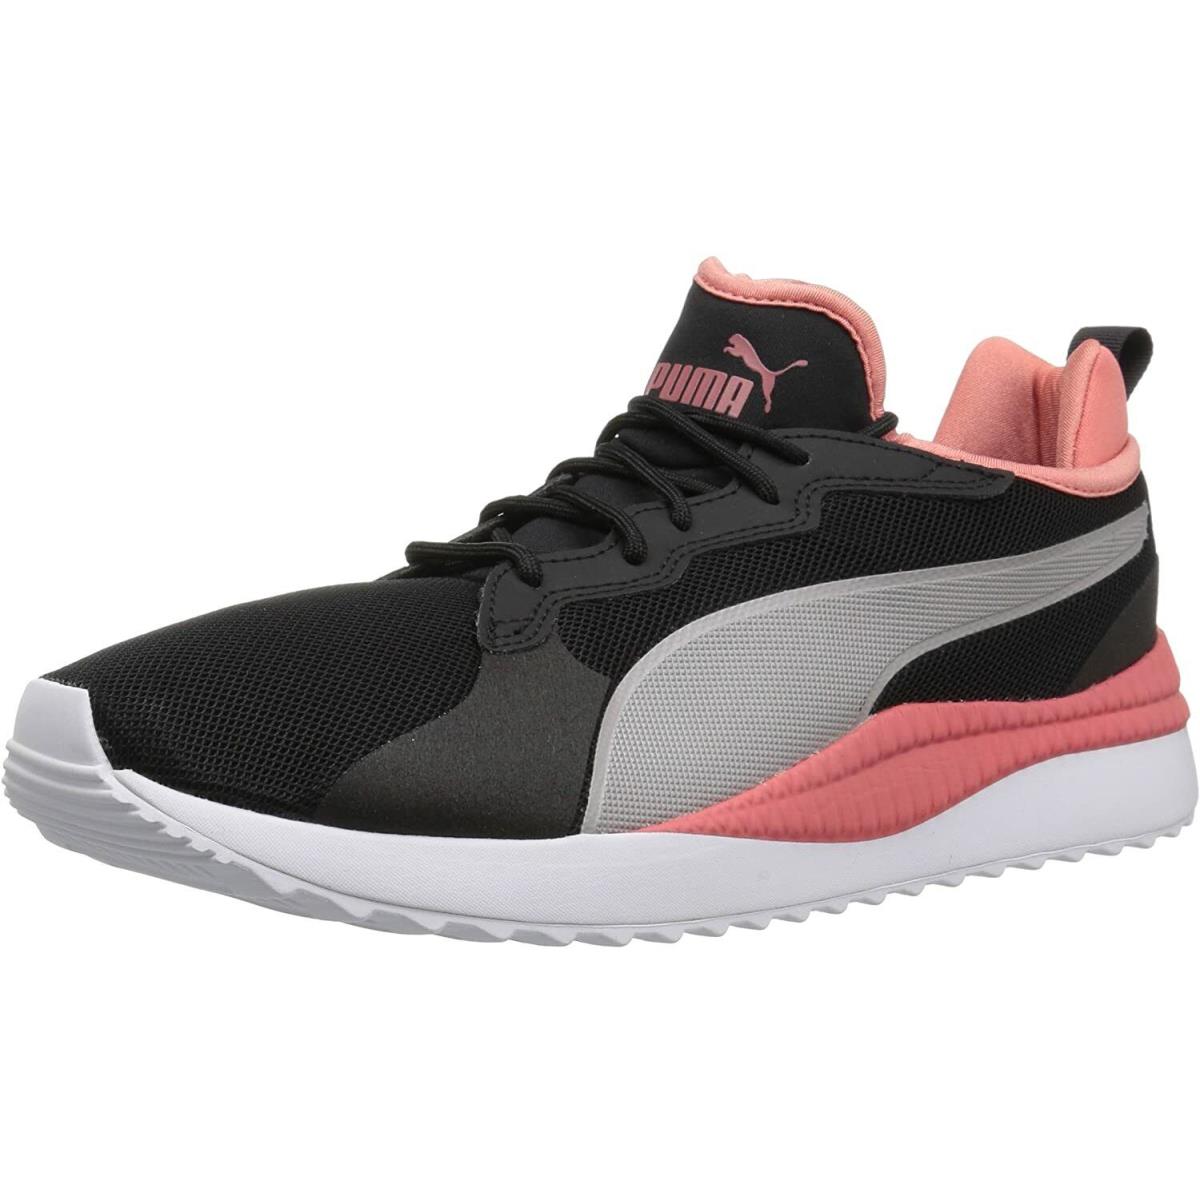 Puma Men`s Pacer Next Running Athletic Shoes Sneakers Black Coral - Black/Coral/Metallic